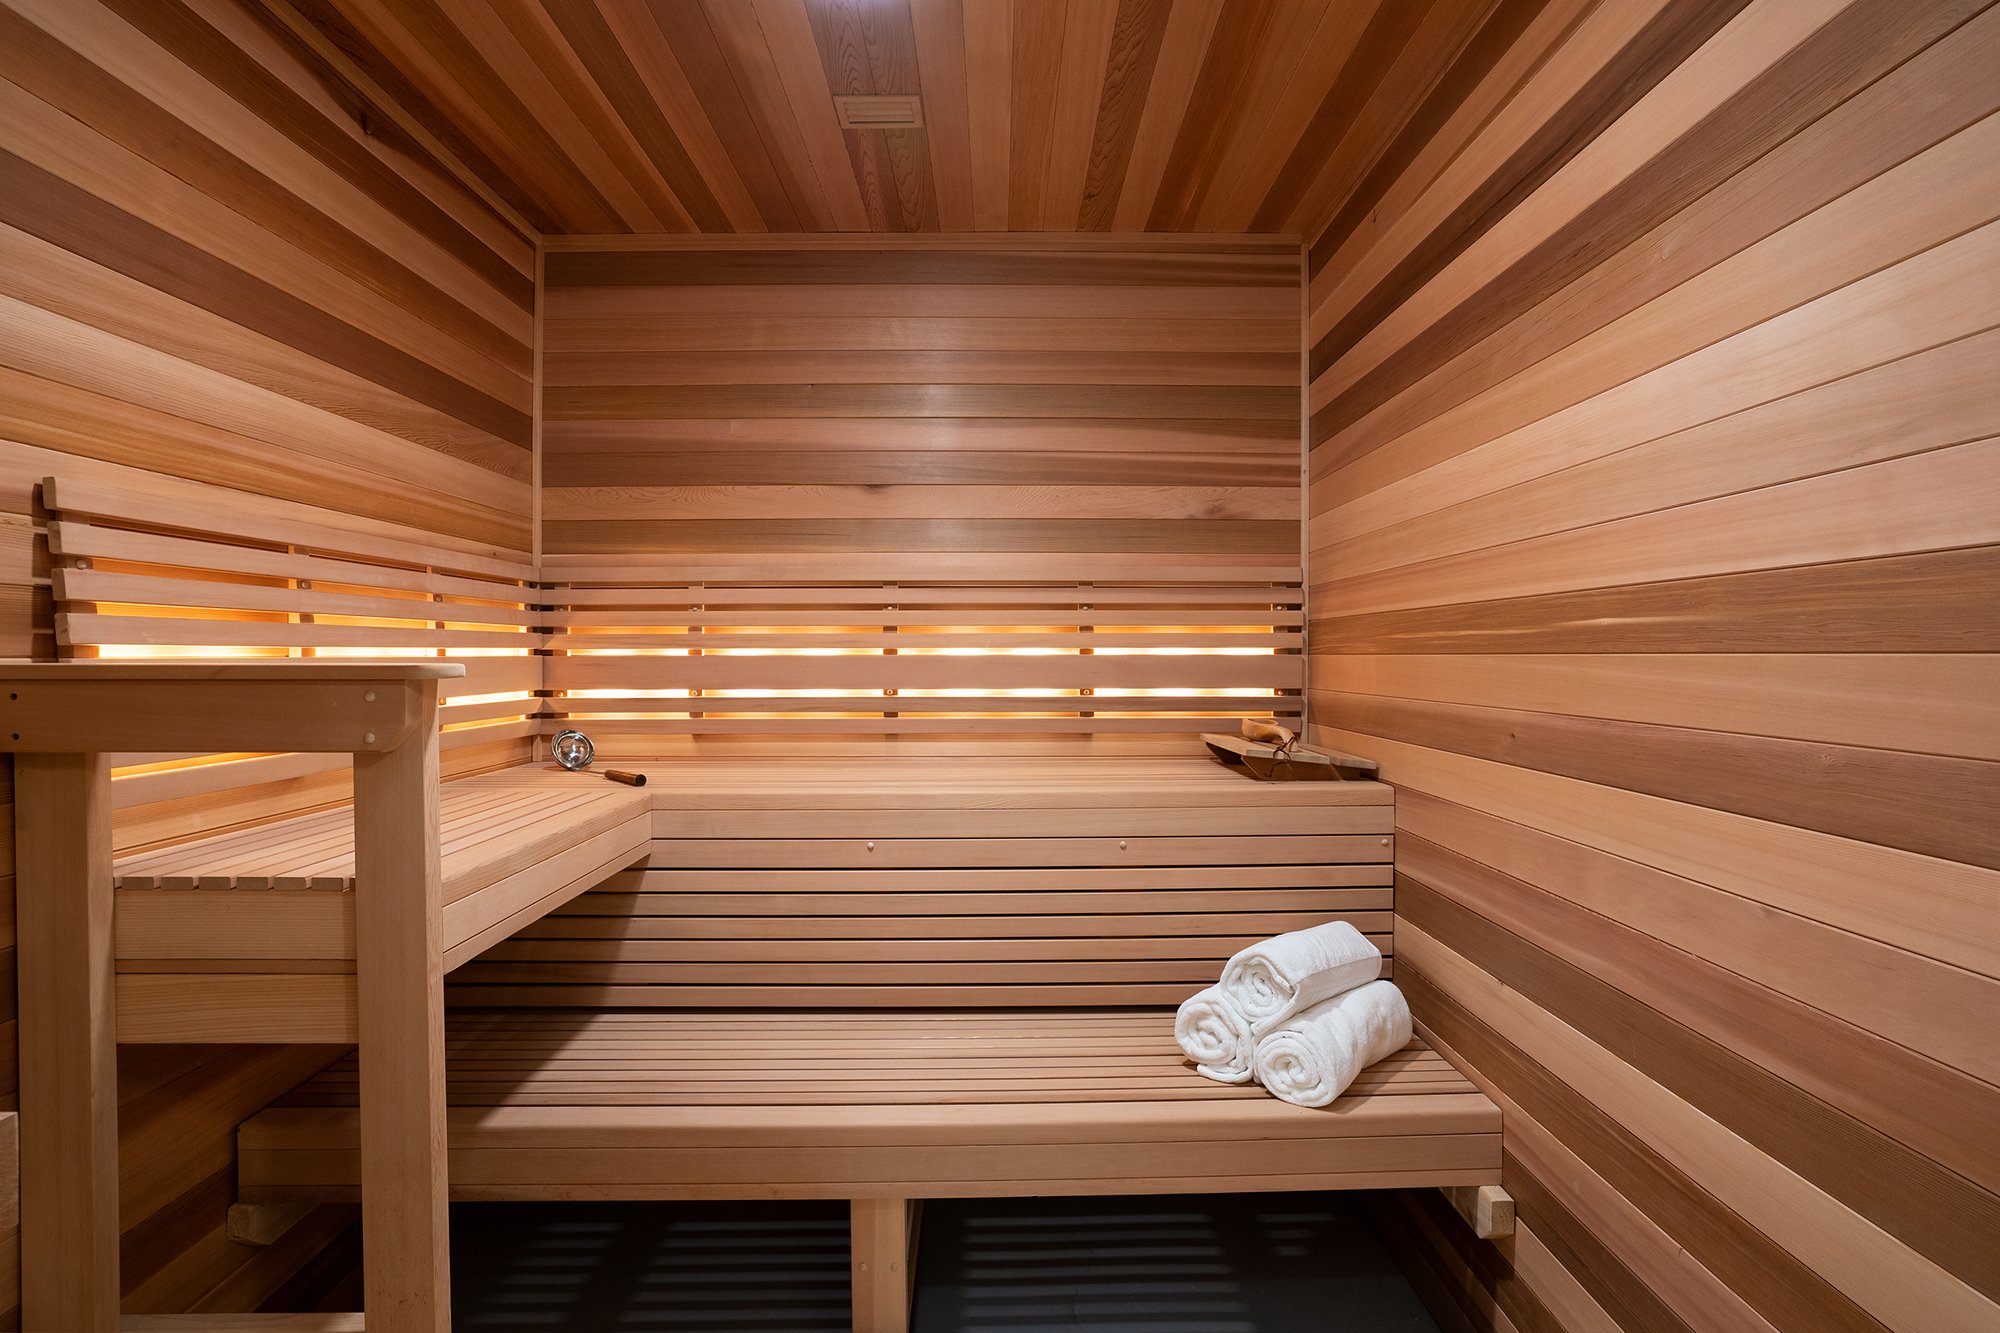 Tahoe Beach Club's spa features a modern wood sauna and fresh, white towels. (Copy) (Copy) (Copy)